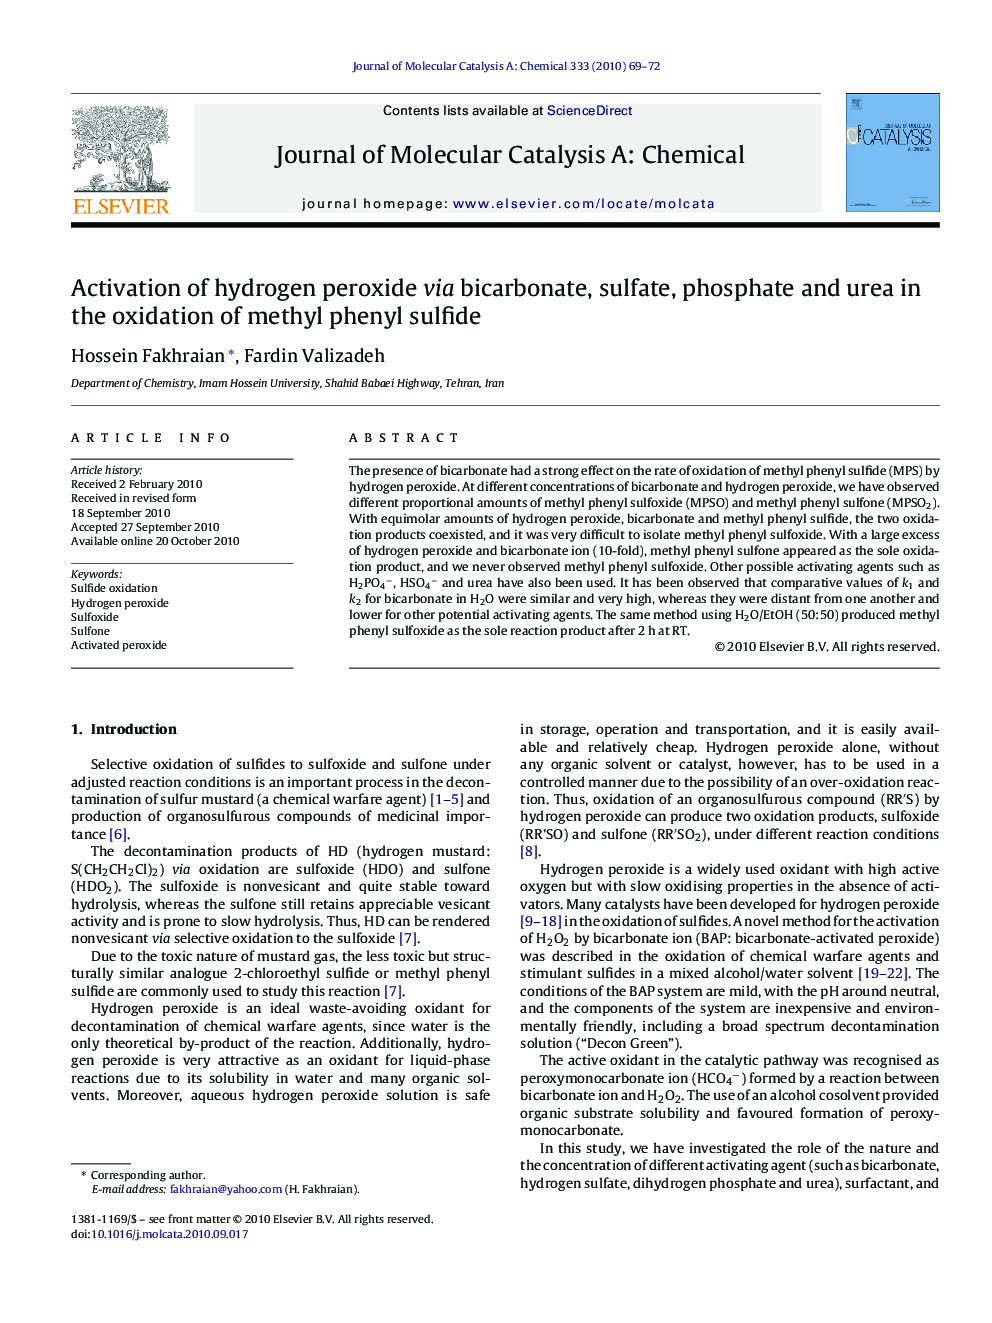 Activation of hydrogen peroxide via bicarbonate, sulfate, phosphate and urea in the oxidation of methyl phenyl sulfide